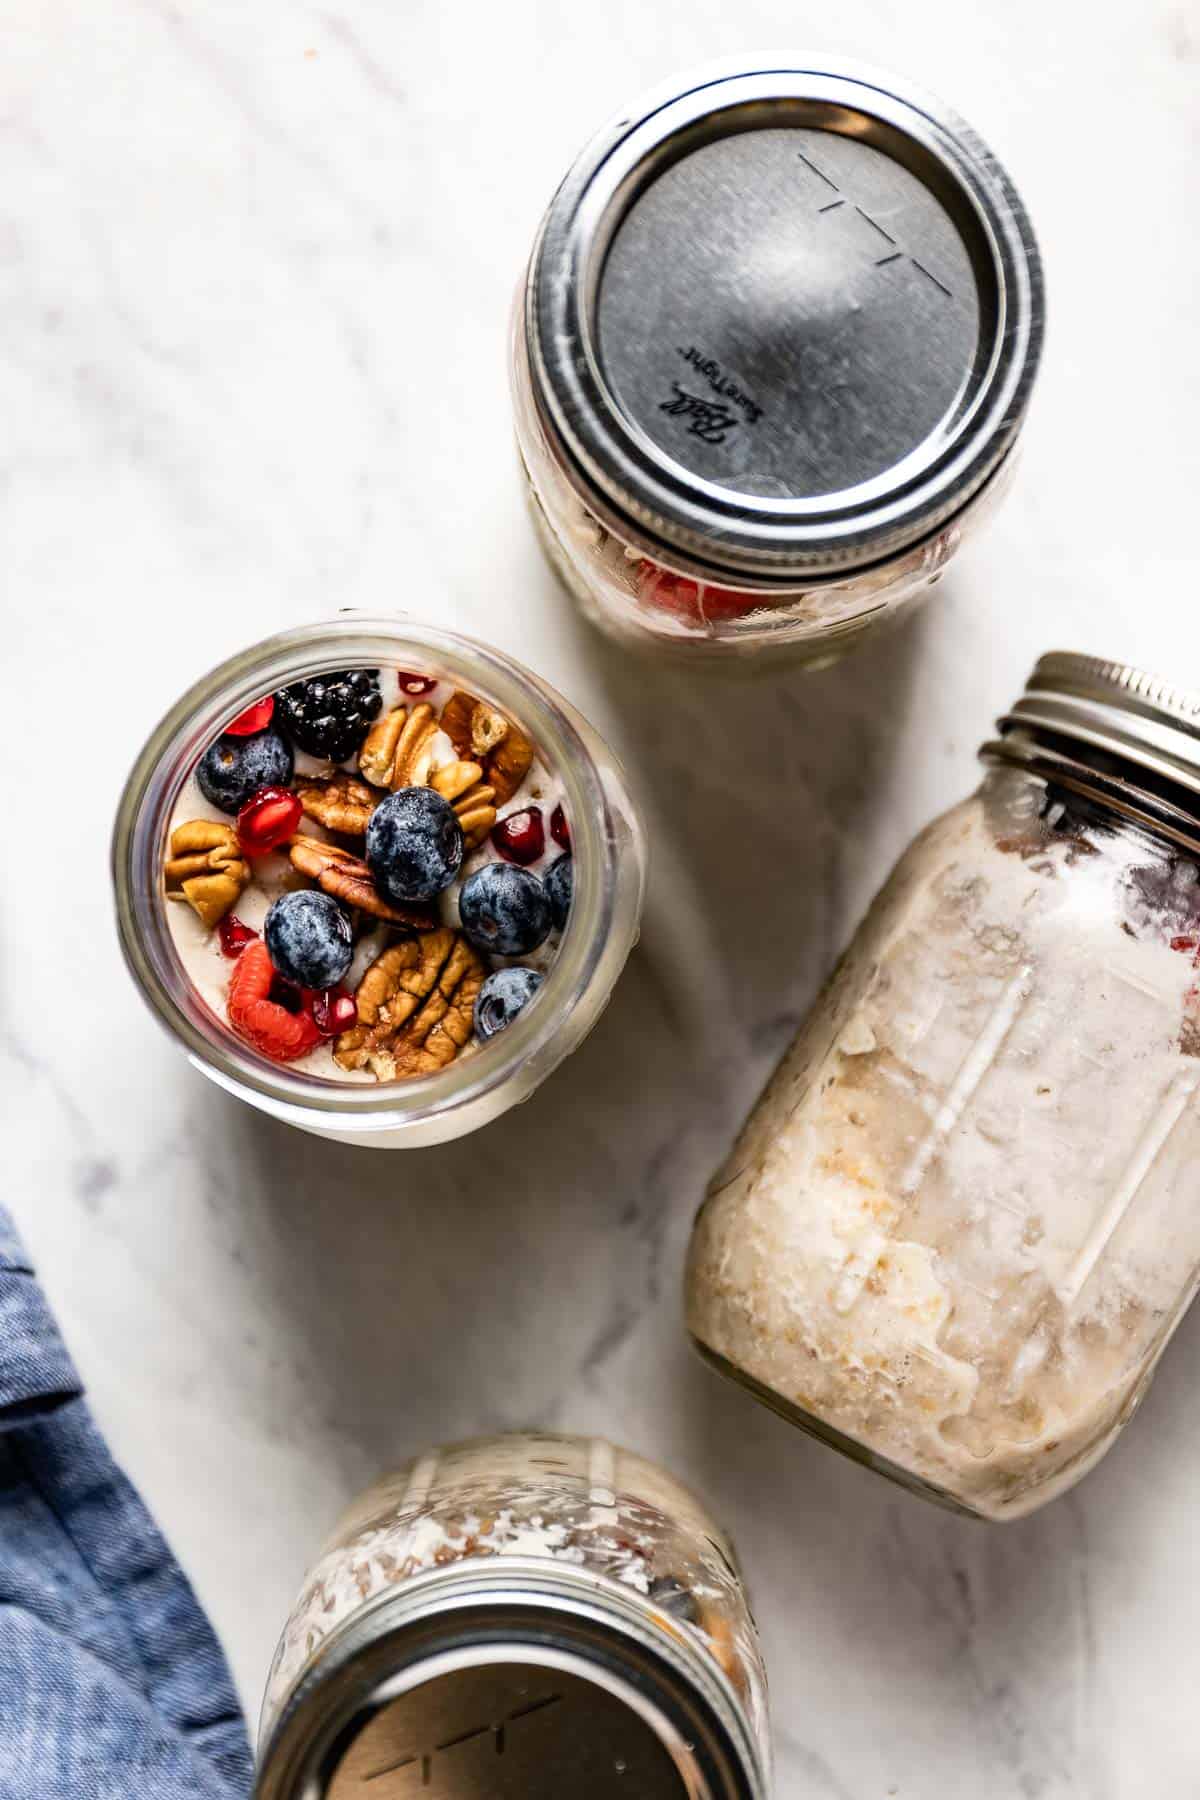 Slow cooker oatmeal with steel cut oats cooked in mason jars from the top view.